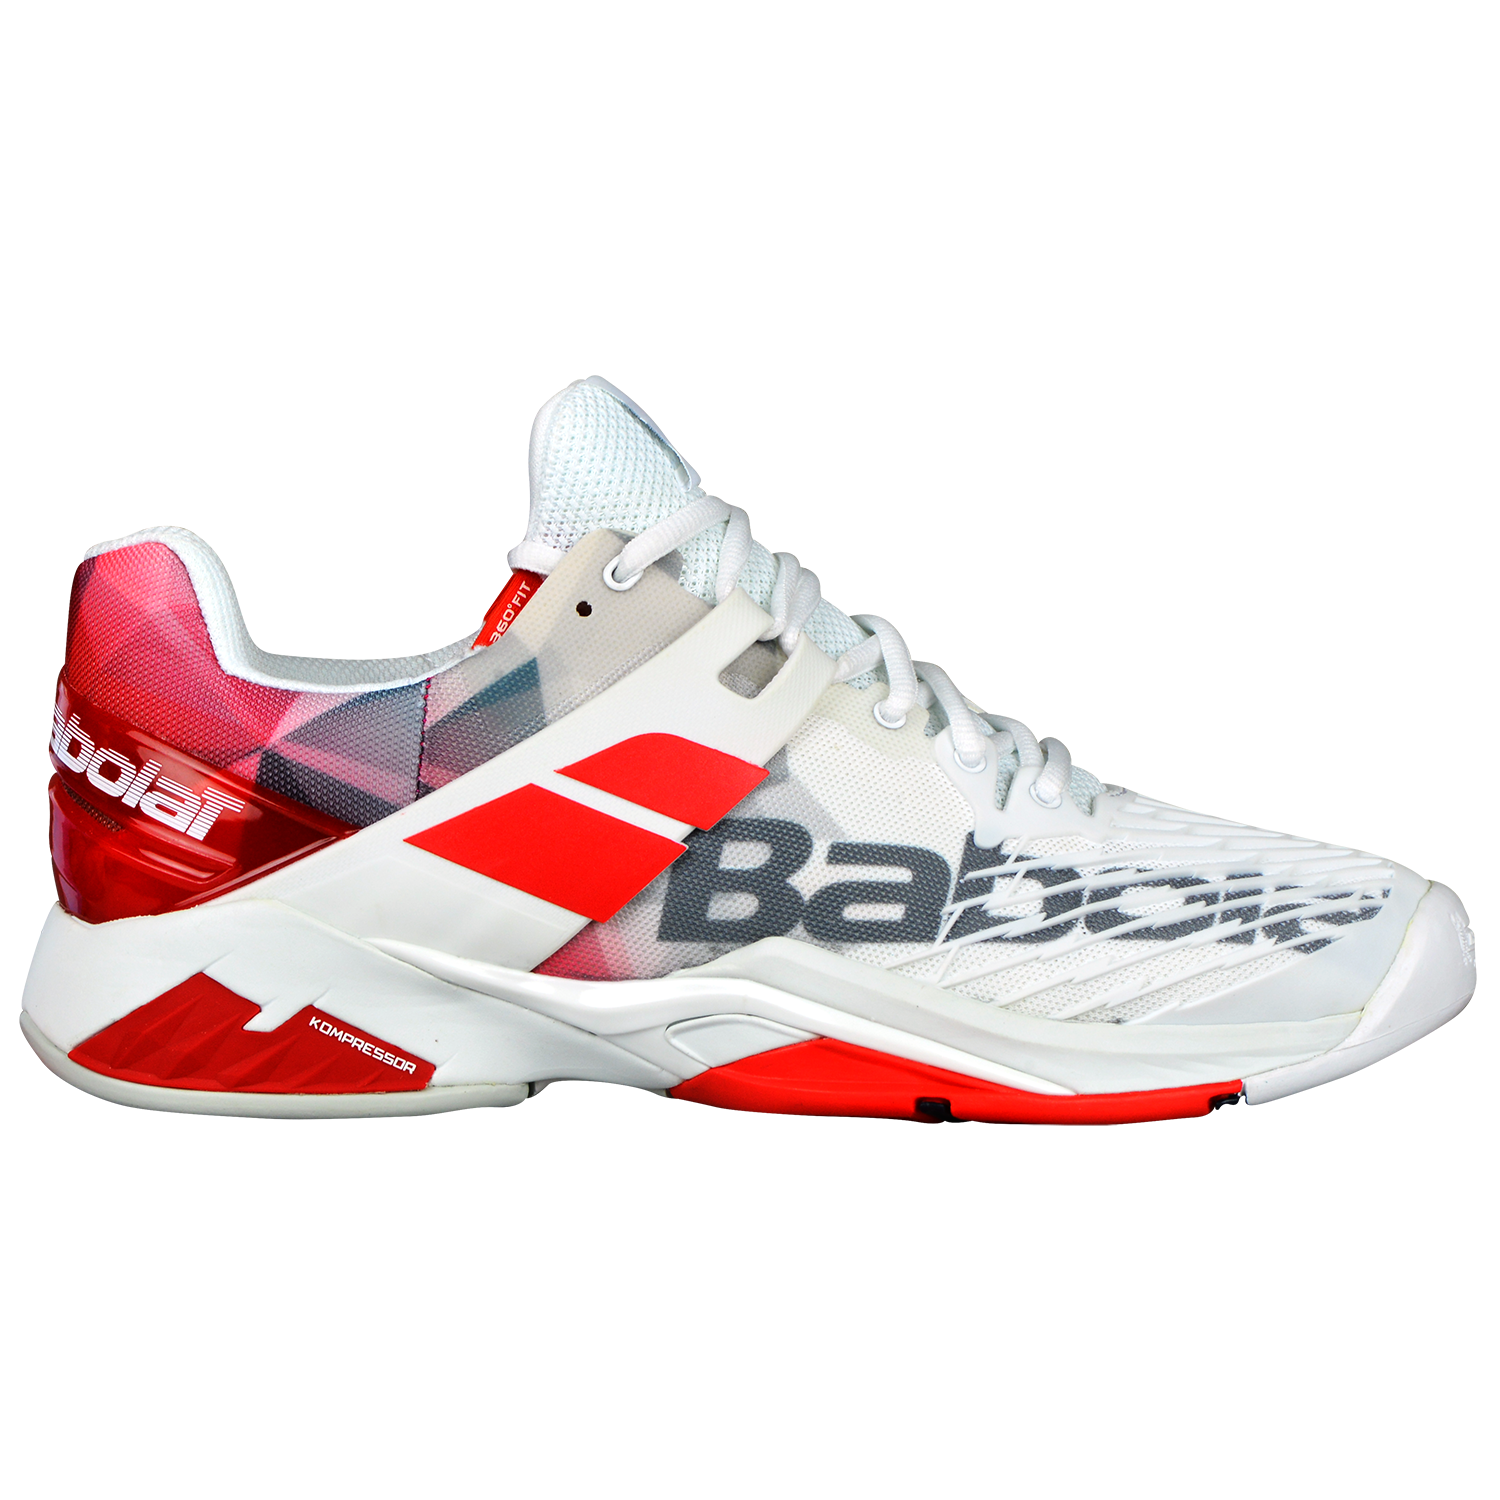 US Size 9 Red/White/Turquoise Details about   Babolat Propulse BPM Clay Mens Tennis Shoes 